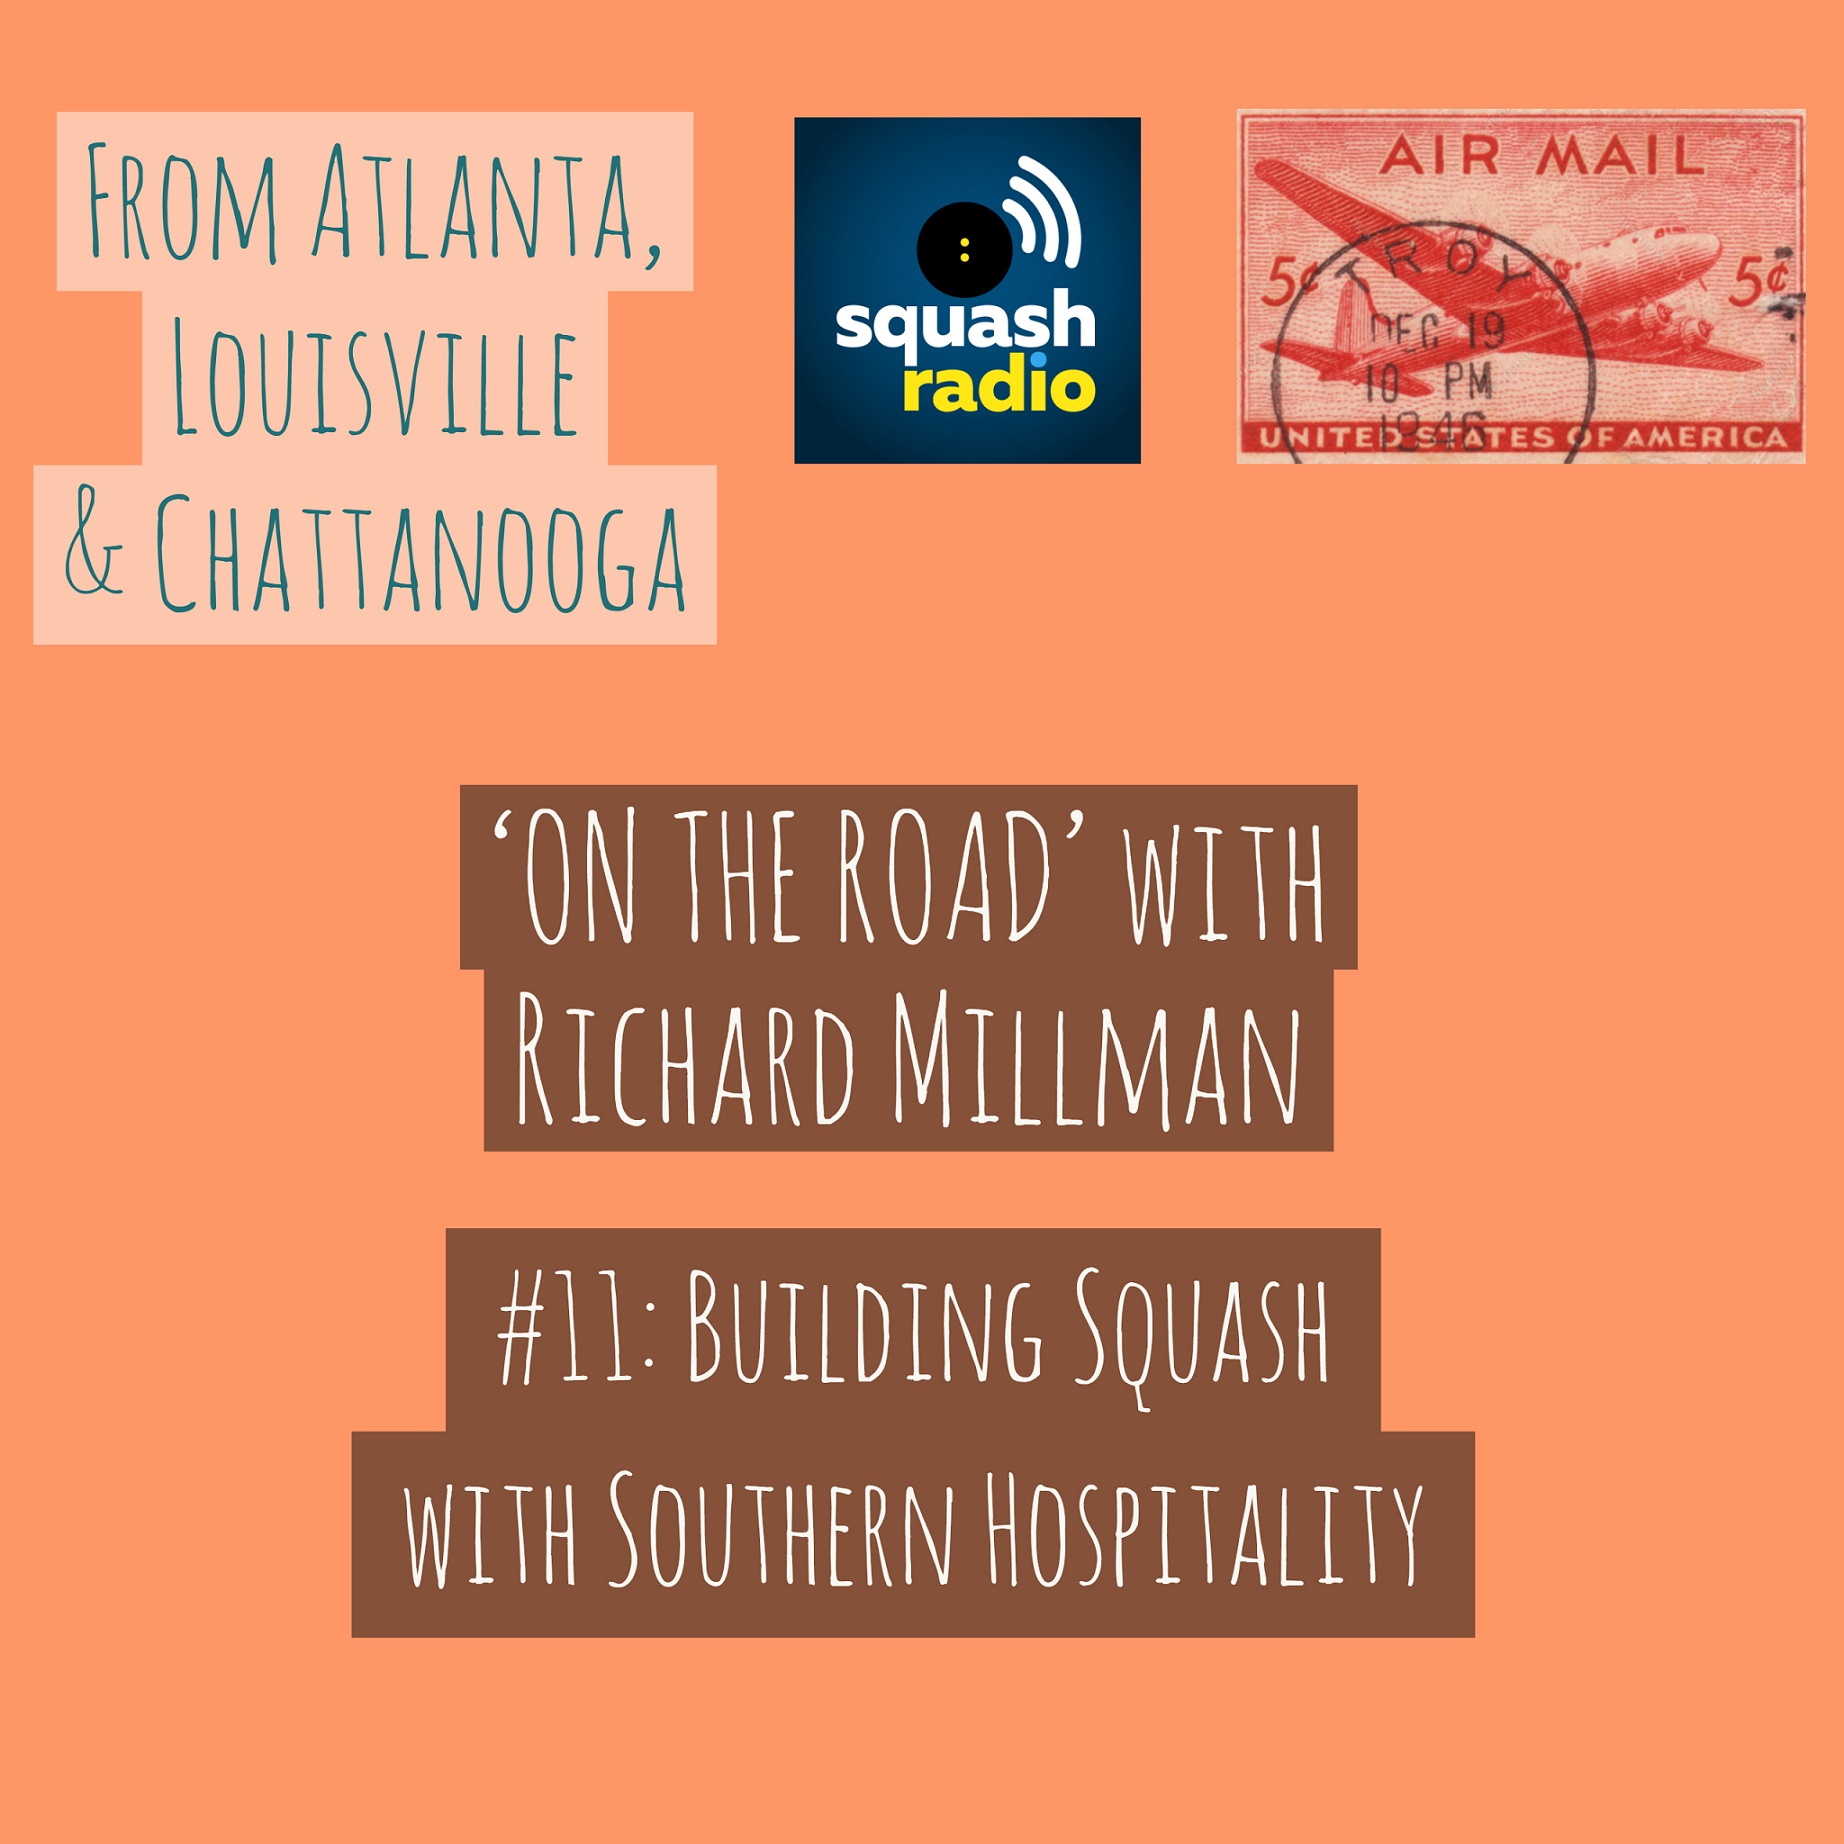 #11 ON THE ROAD: Building Squash with Southern Hospitality